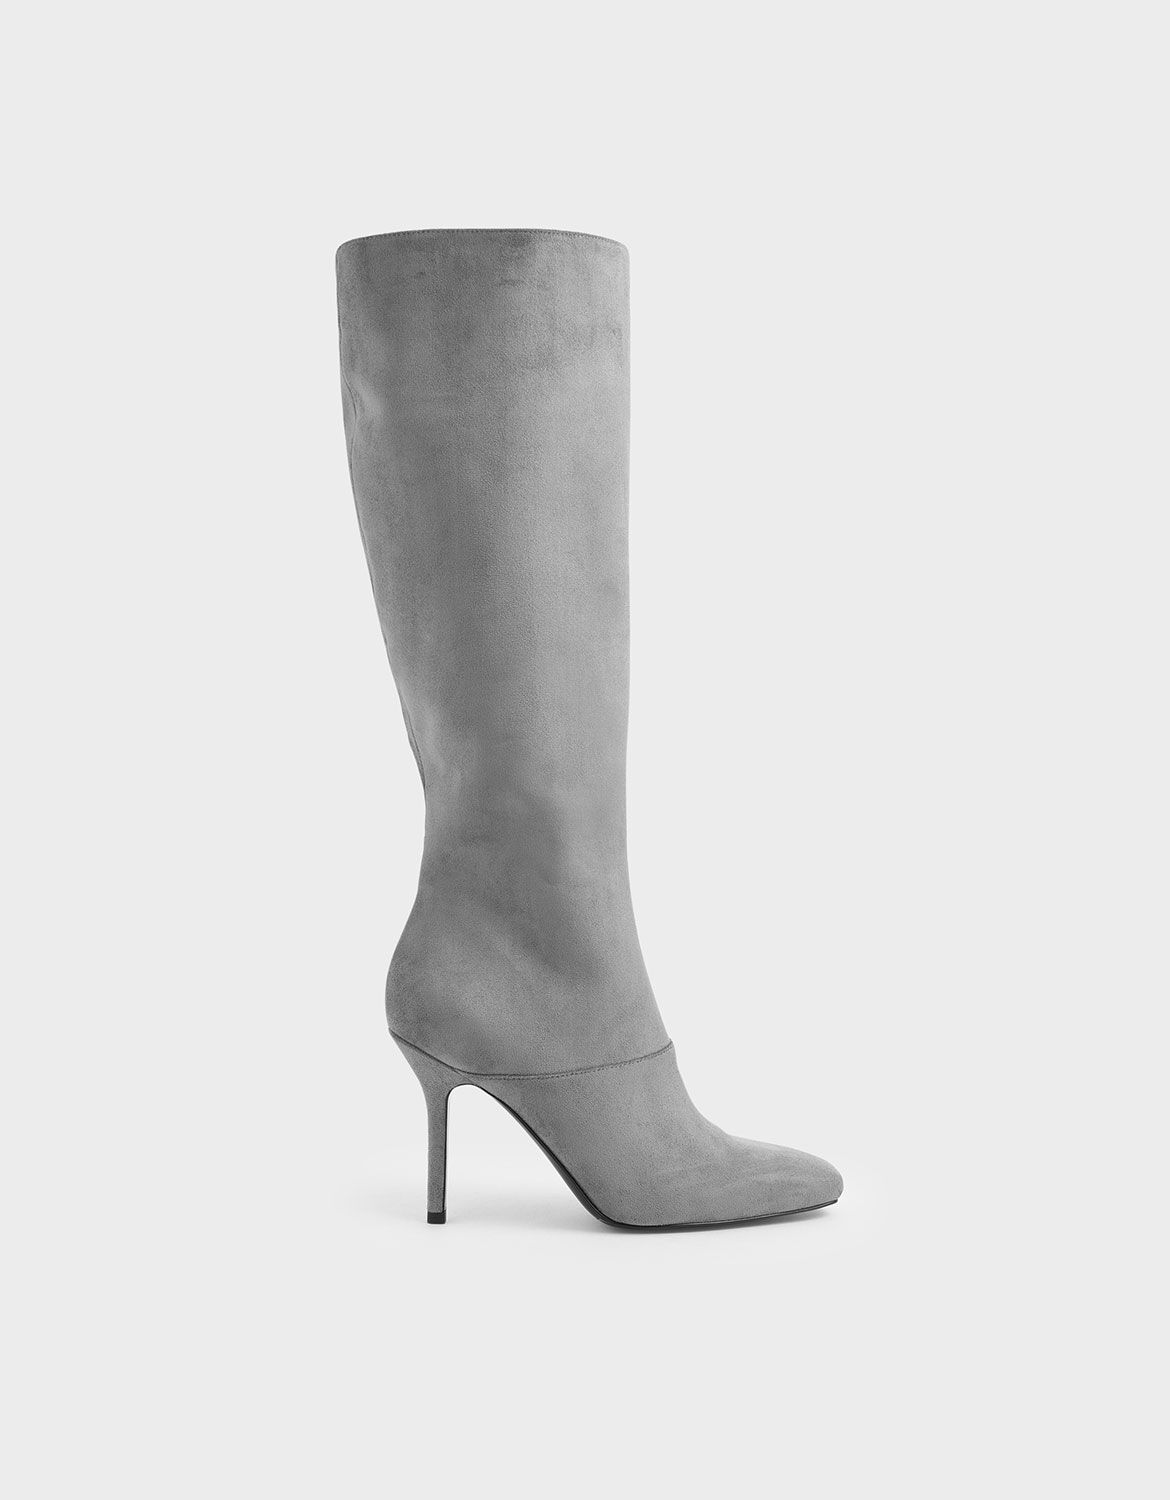 Grey Textured Knee High Boots | CHARLES 